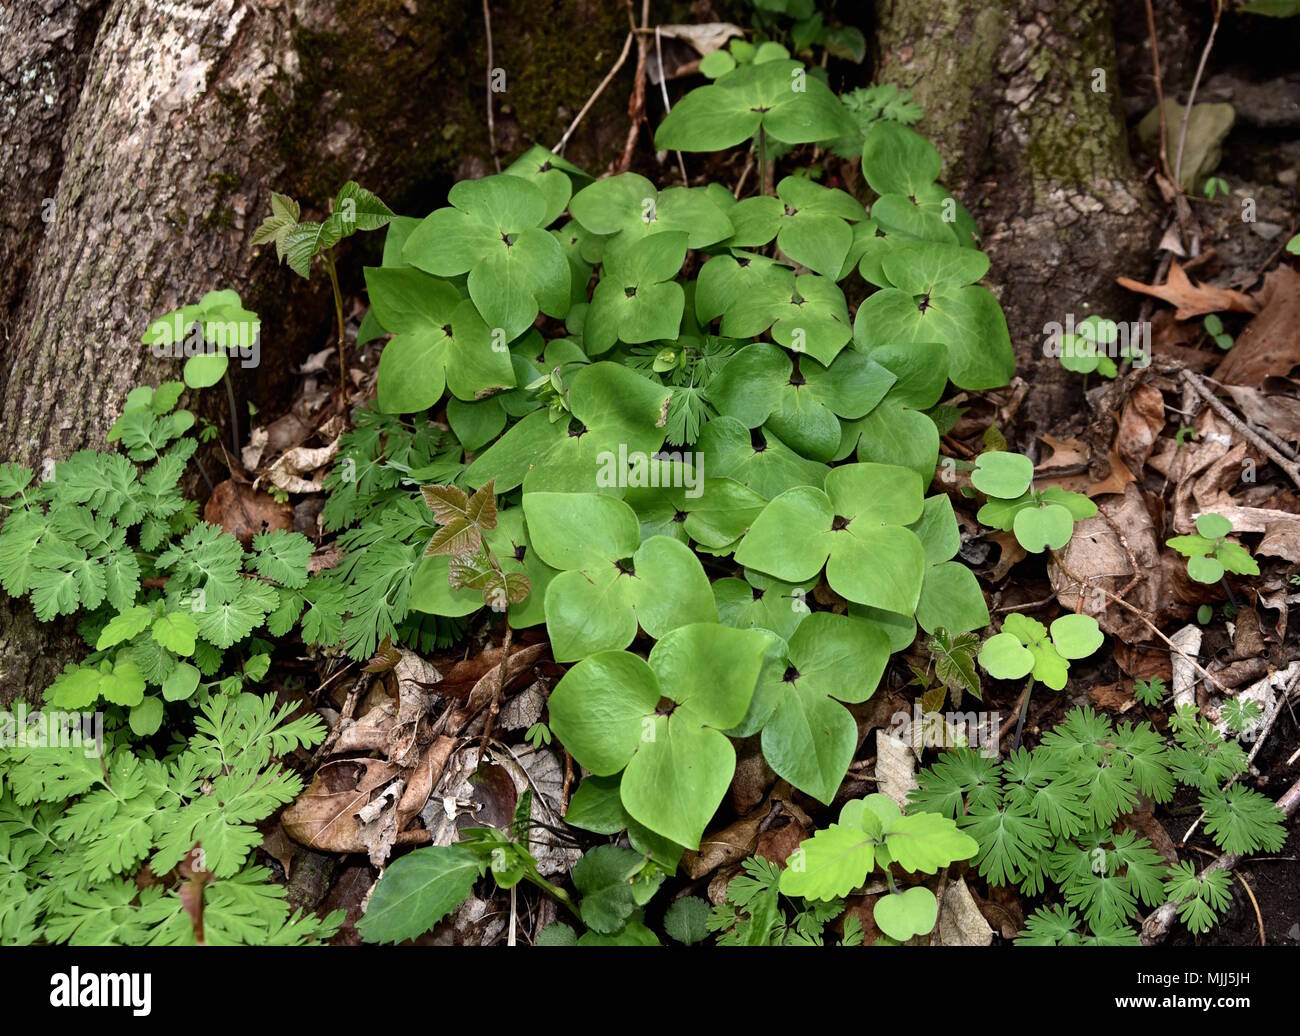 A cluster of three lobed leaves from a sharp lobed hepatica plant. Stock Photo